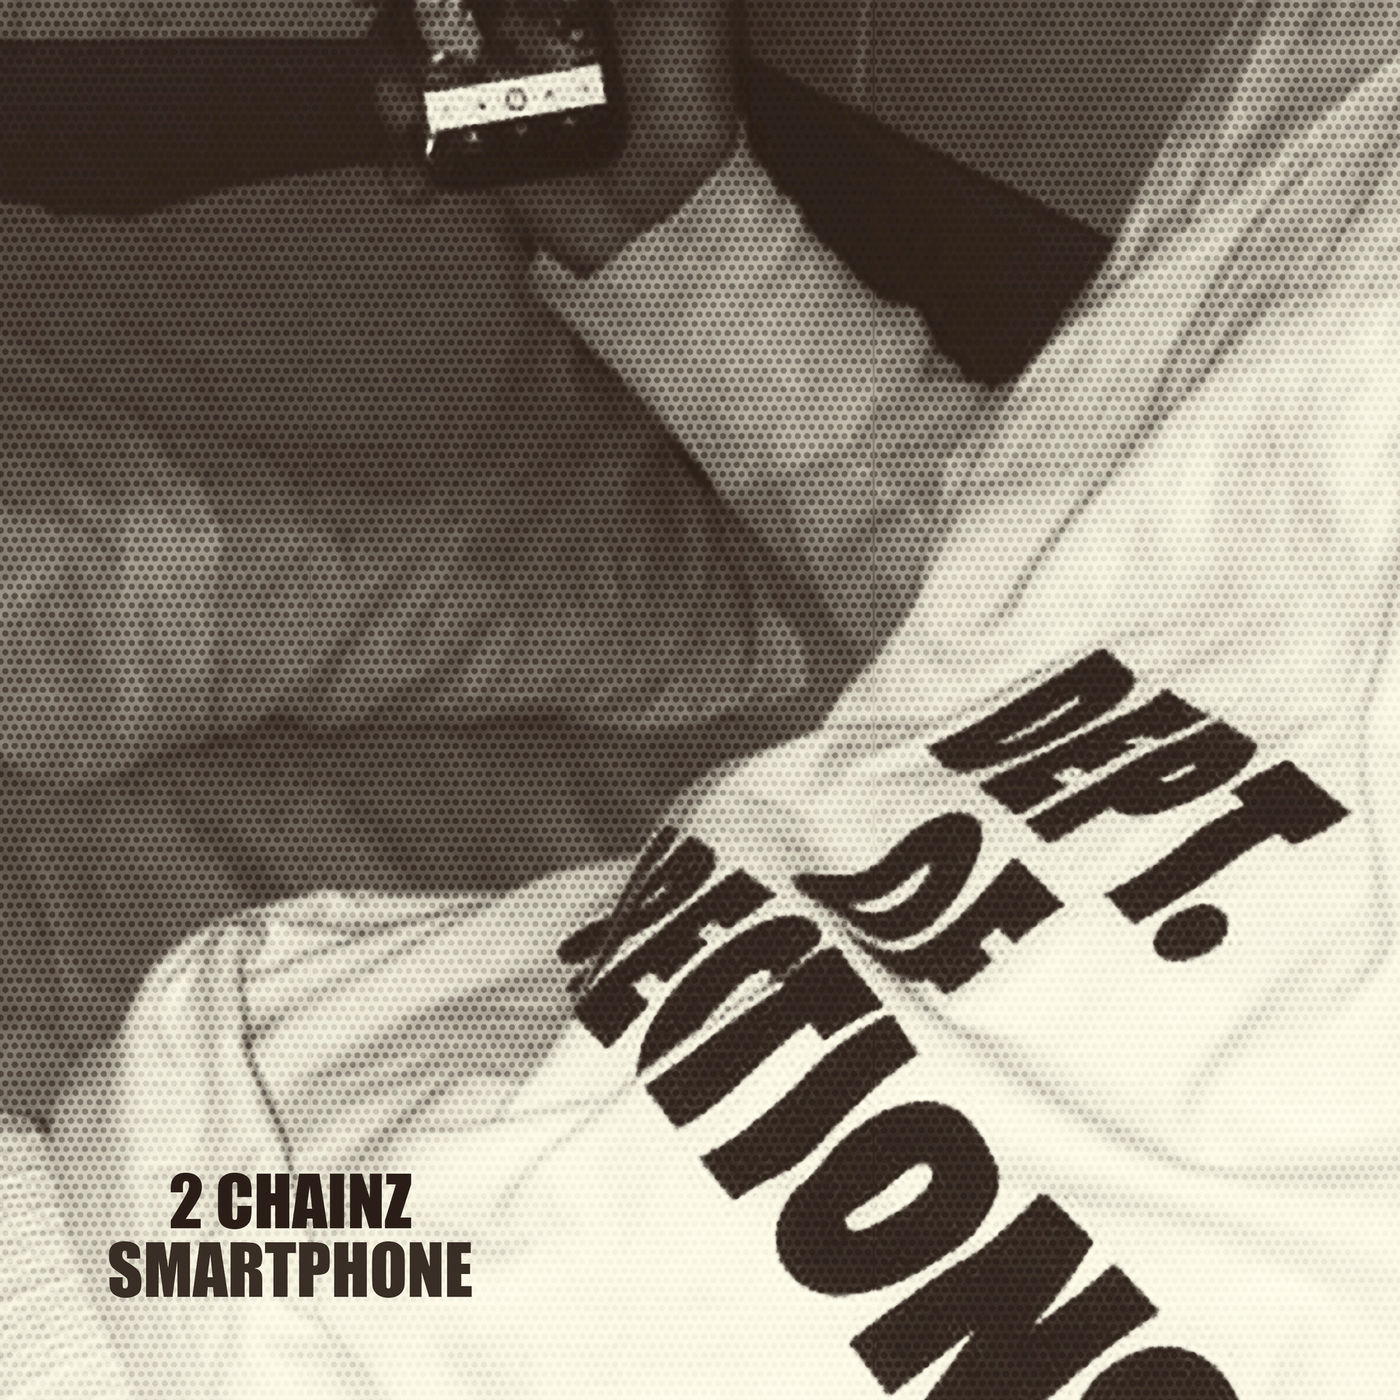 New Music: 2 Chainz – 'Smartphone' | HipHop-N-More